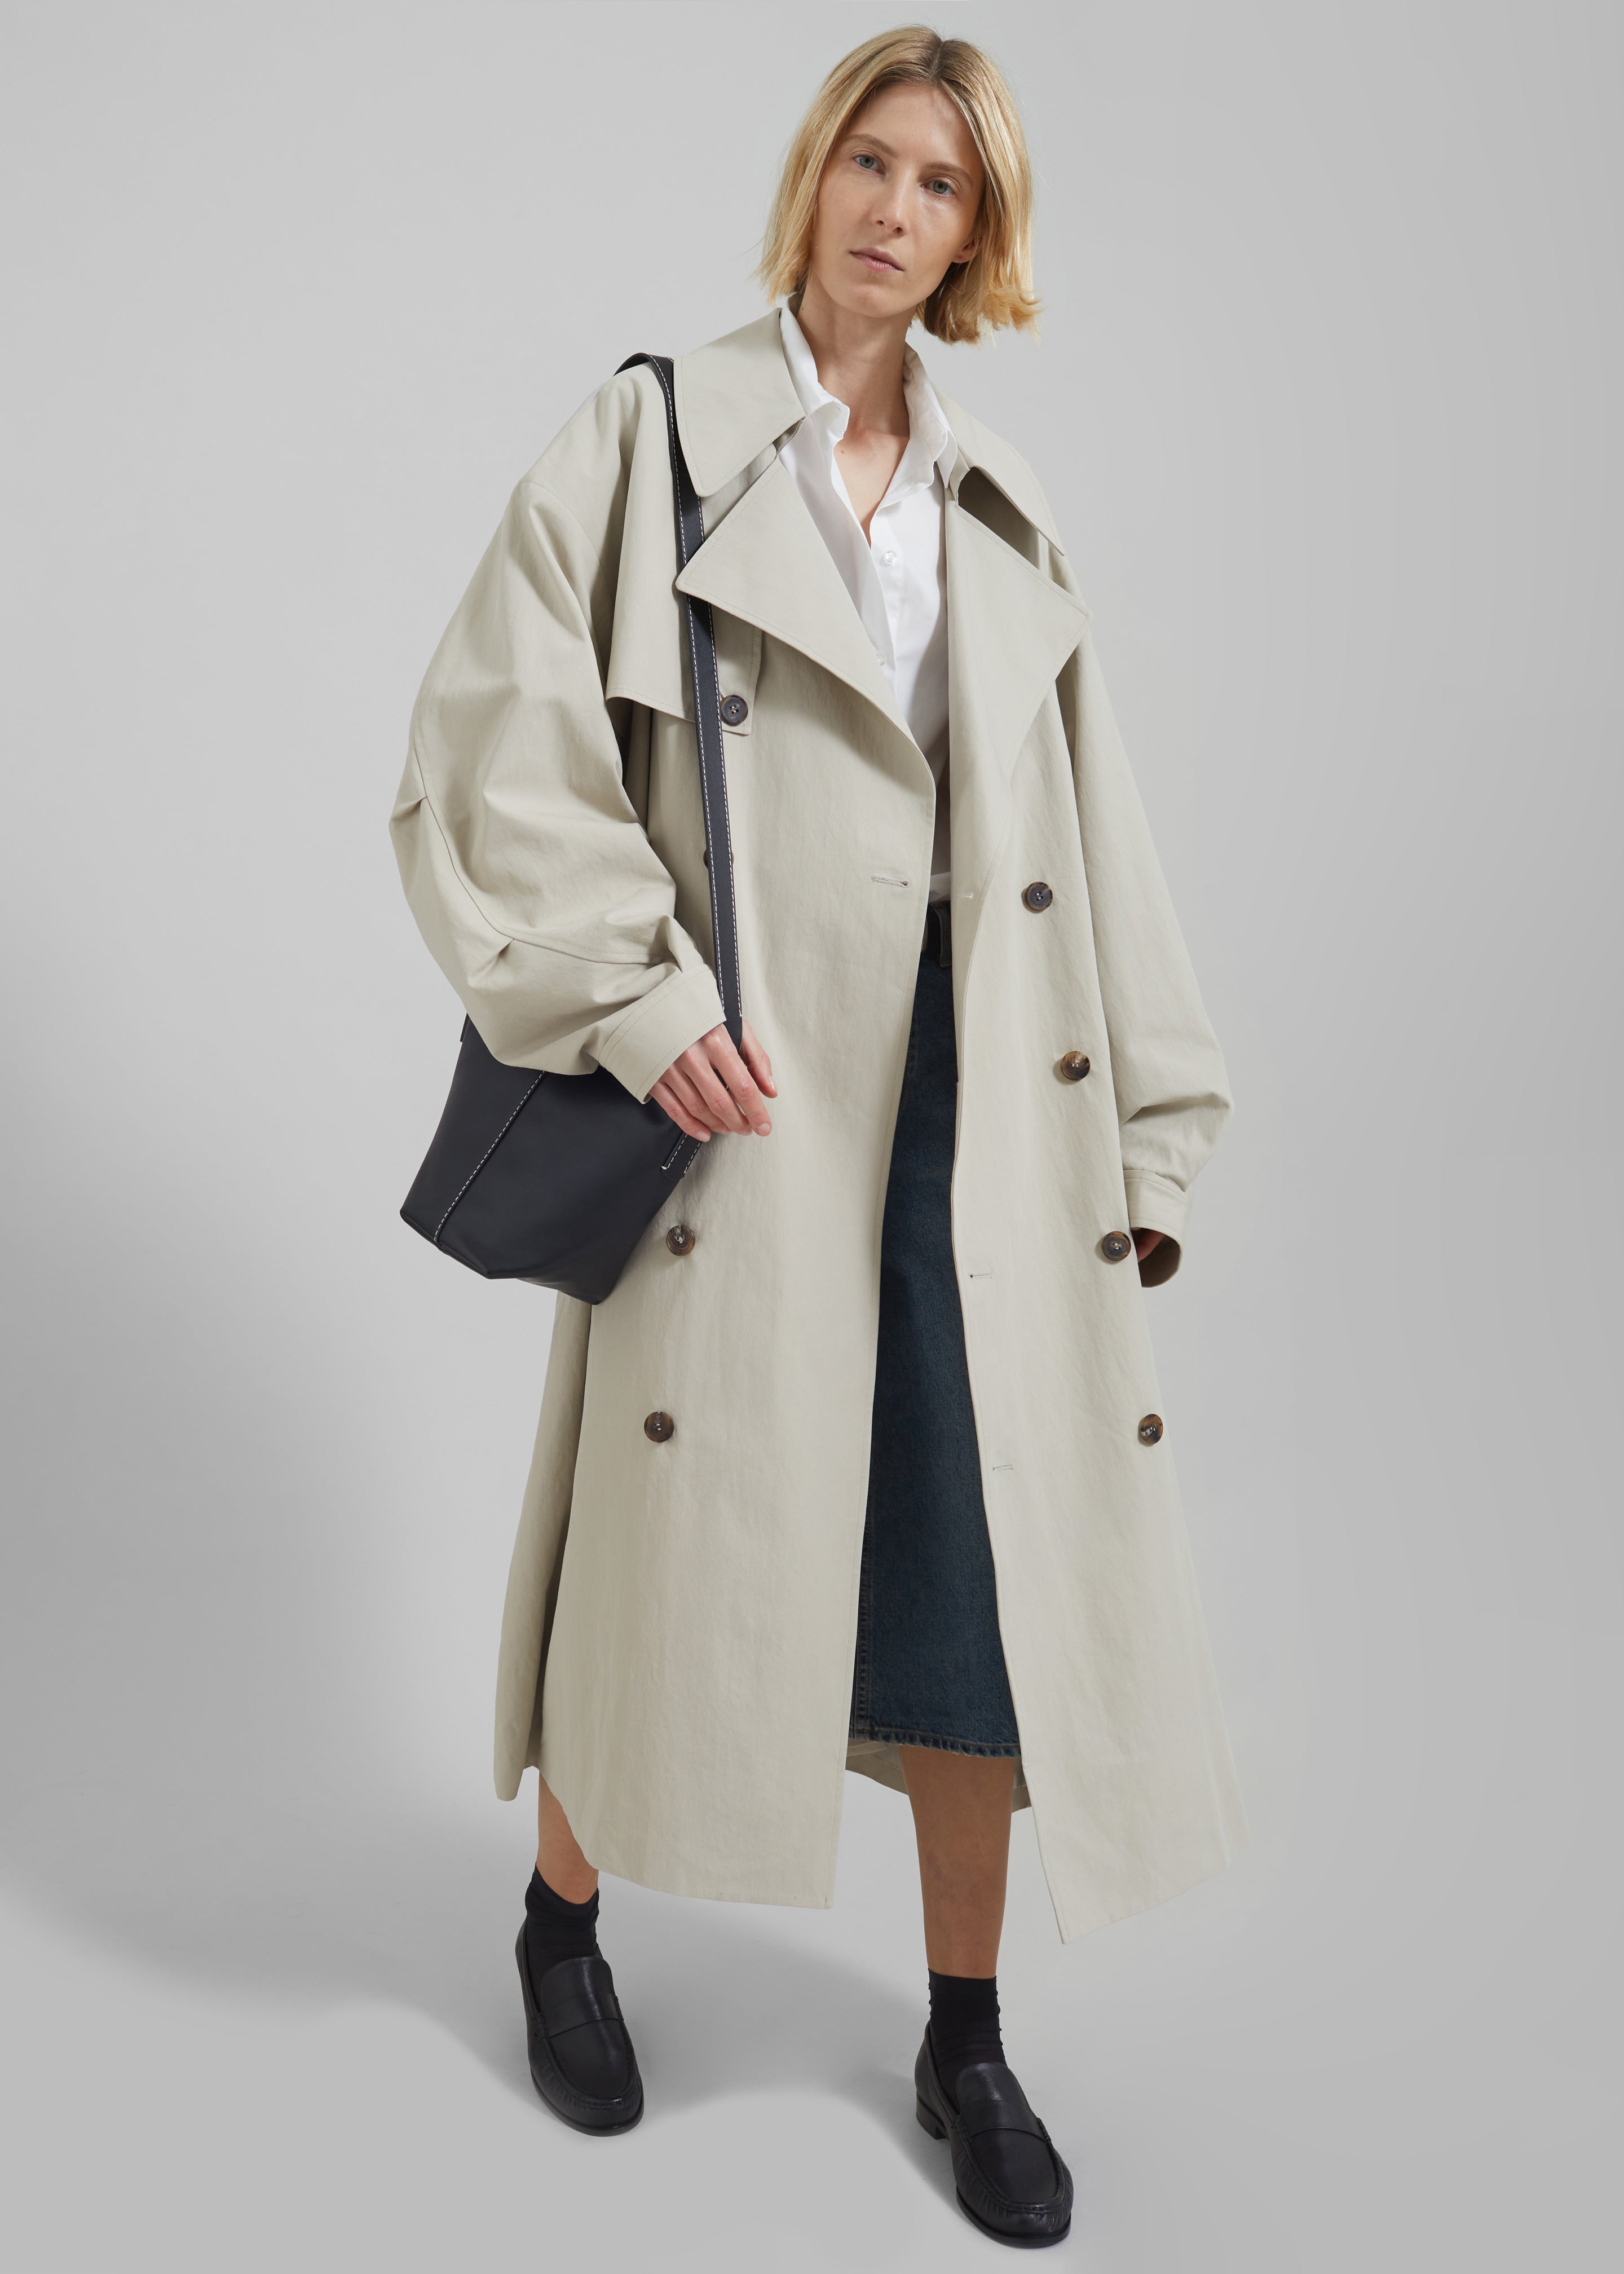 Anika Double Breasted Trench Coat - Beige - 7